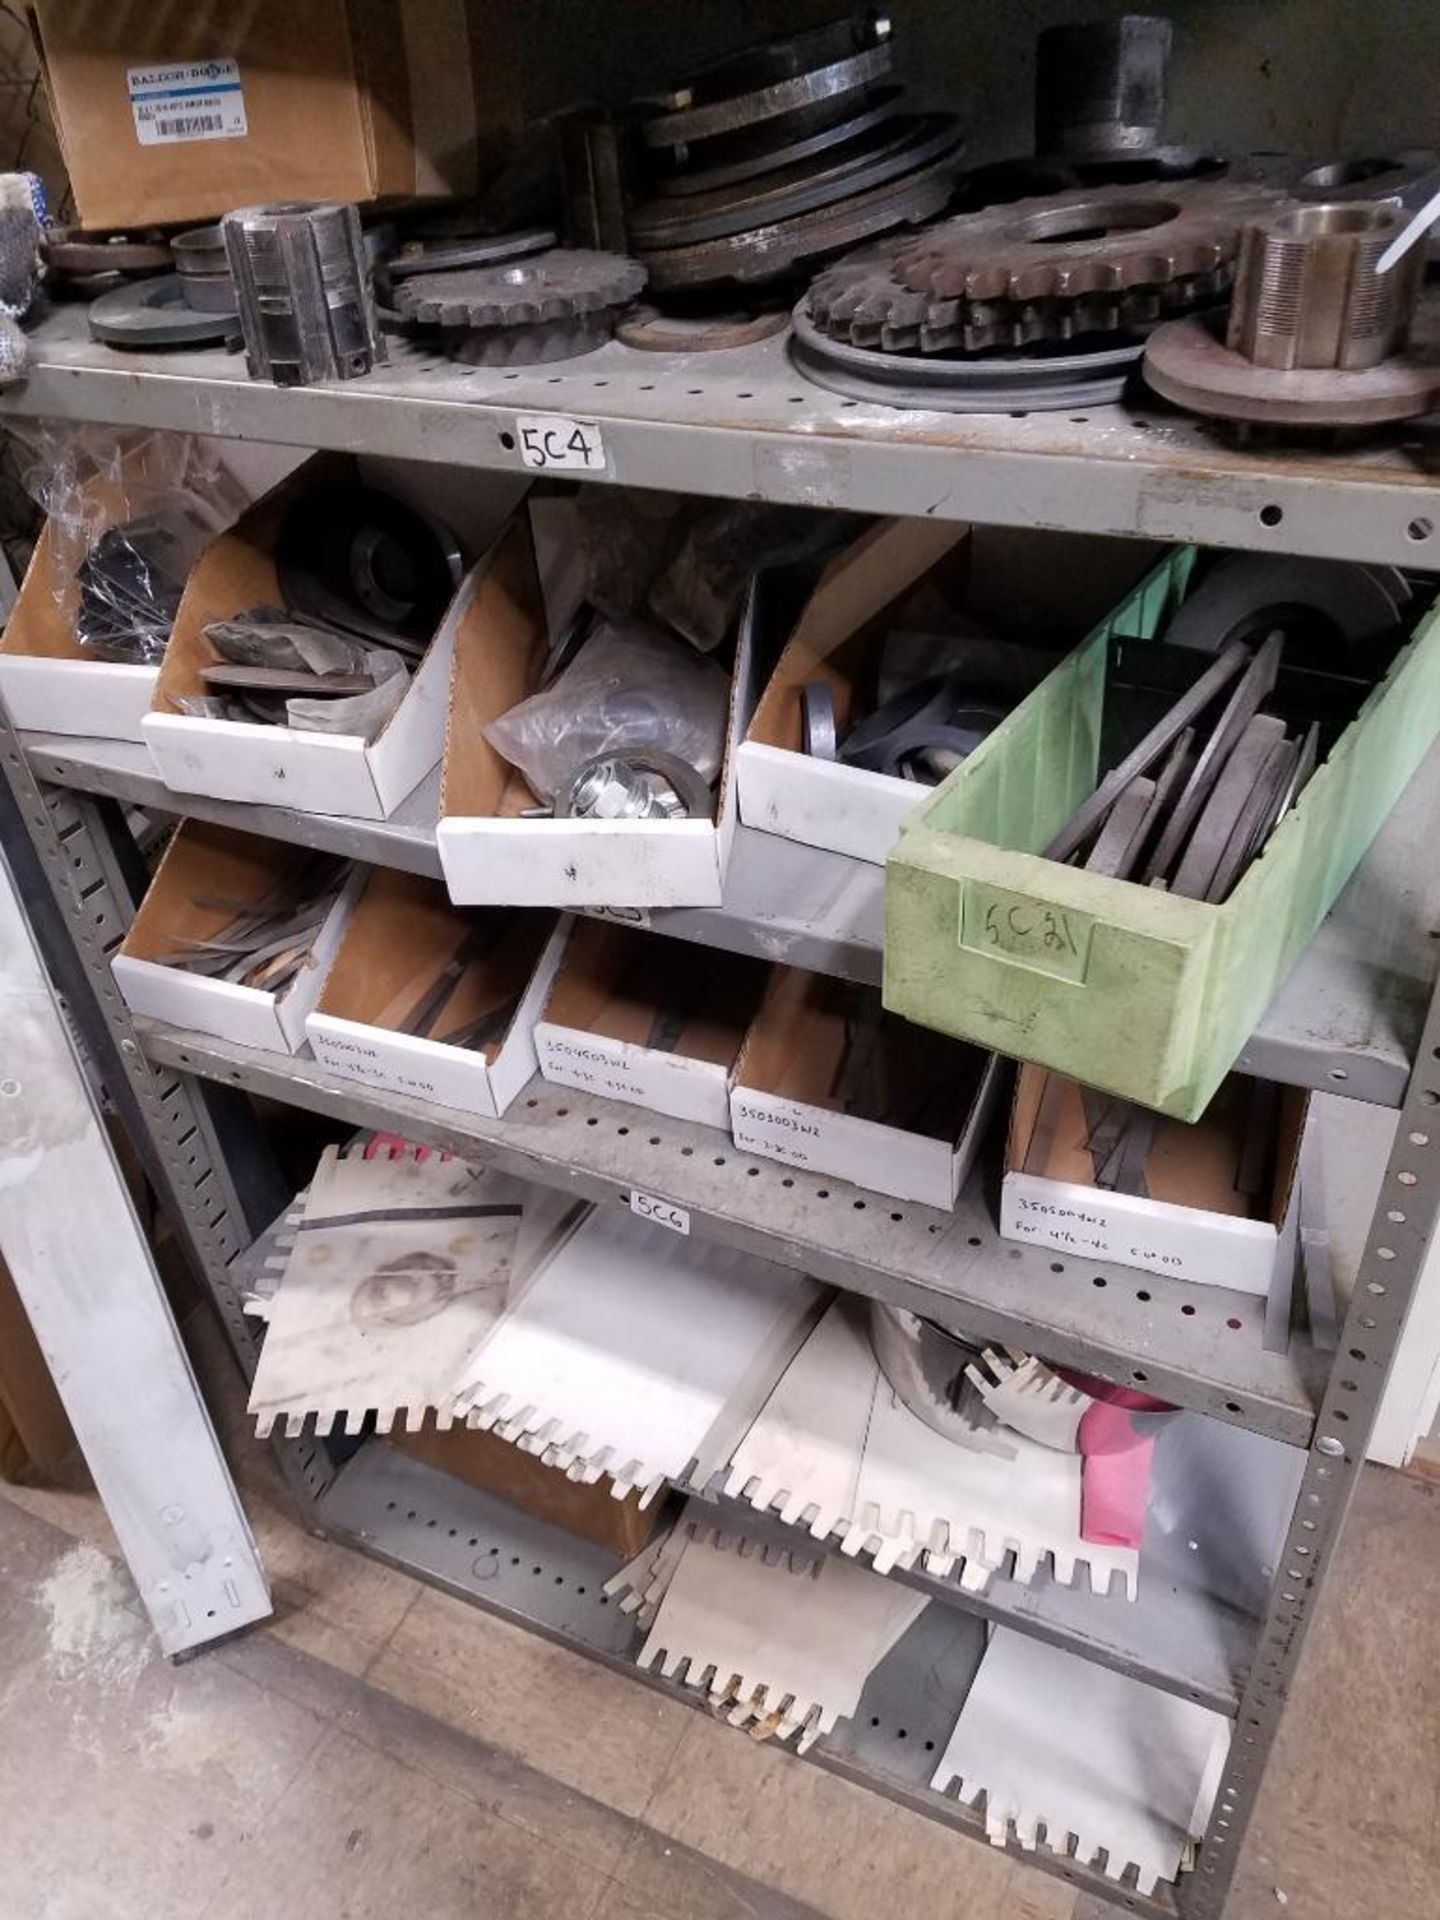 shelf, sprockets, gears, belts, and various parts - Image 5 of 5